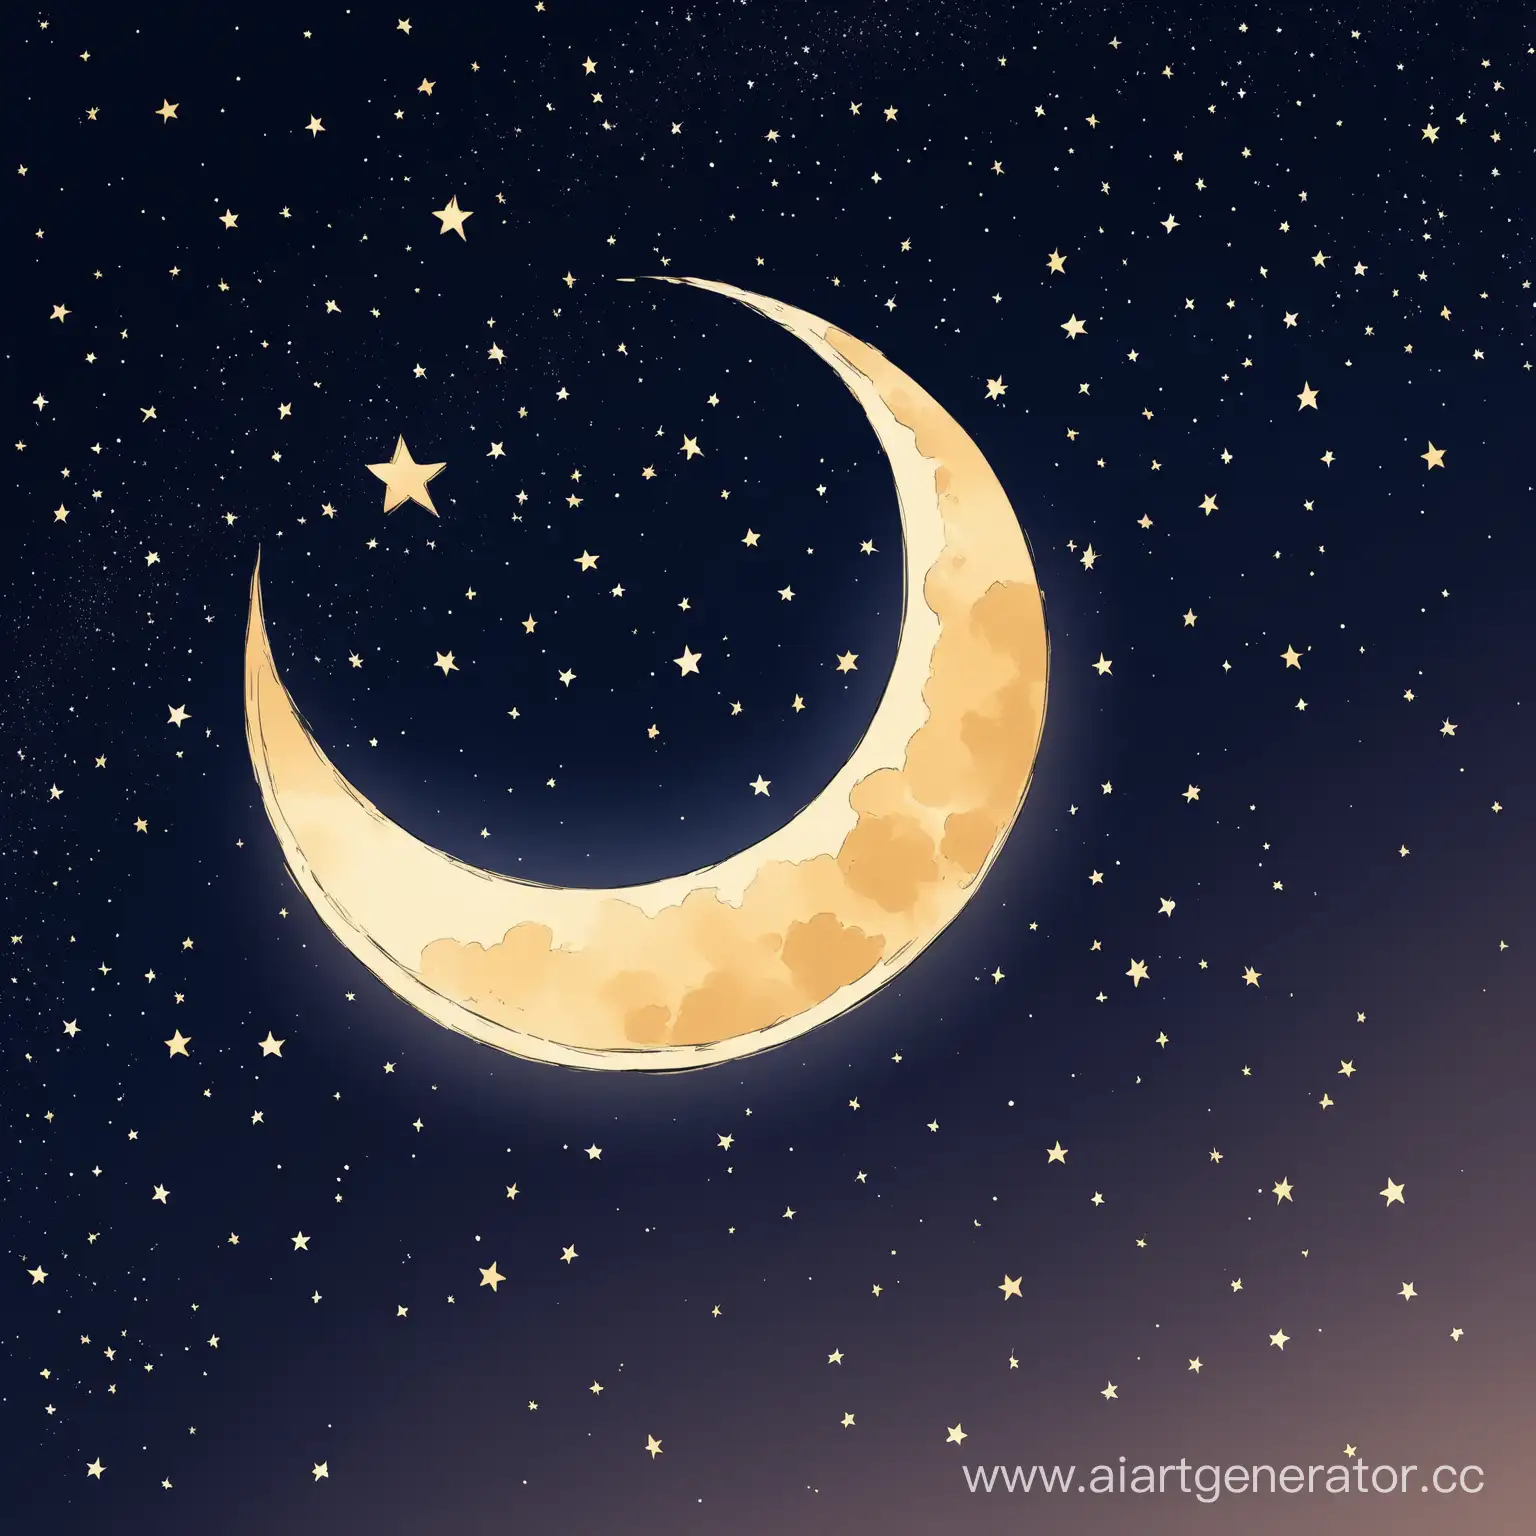 A crescent moon with stars